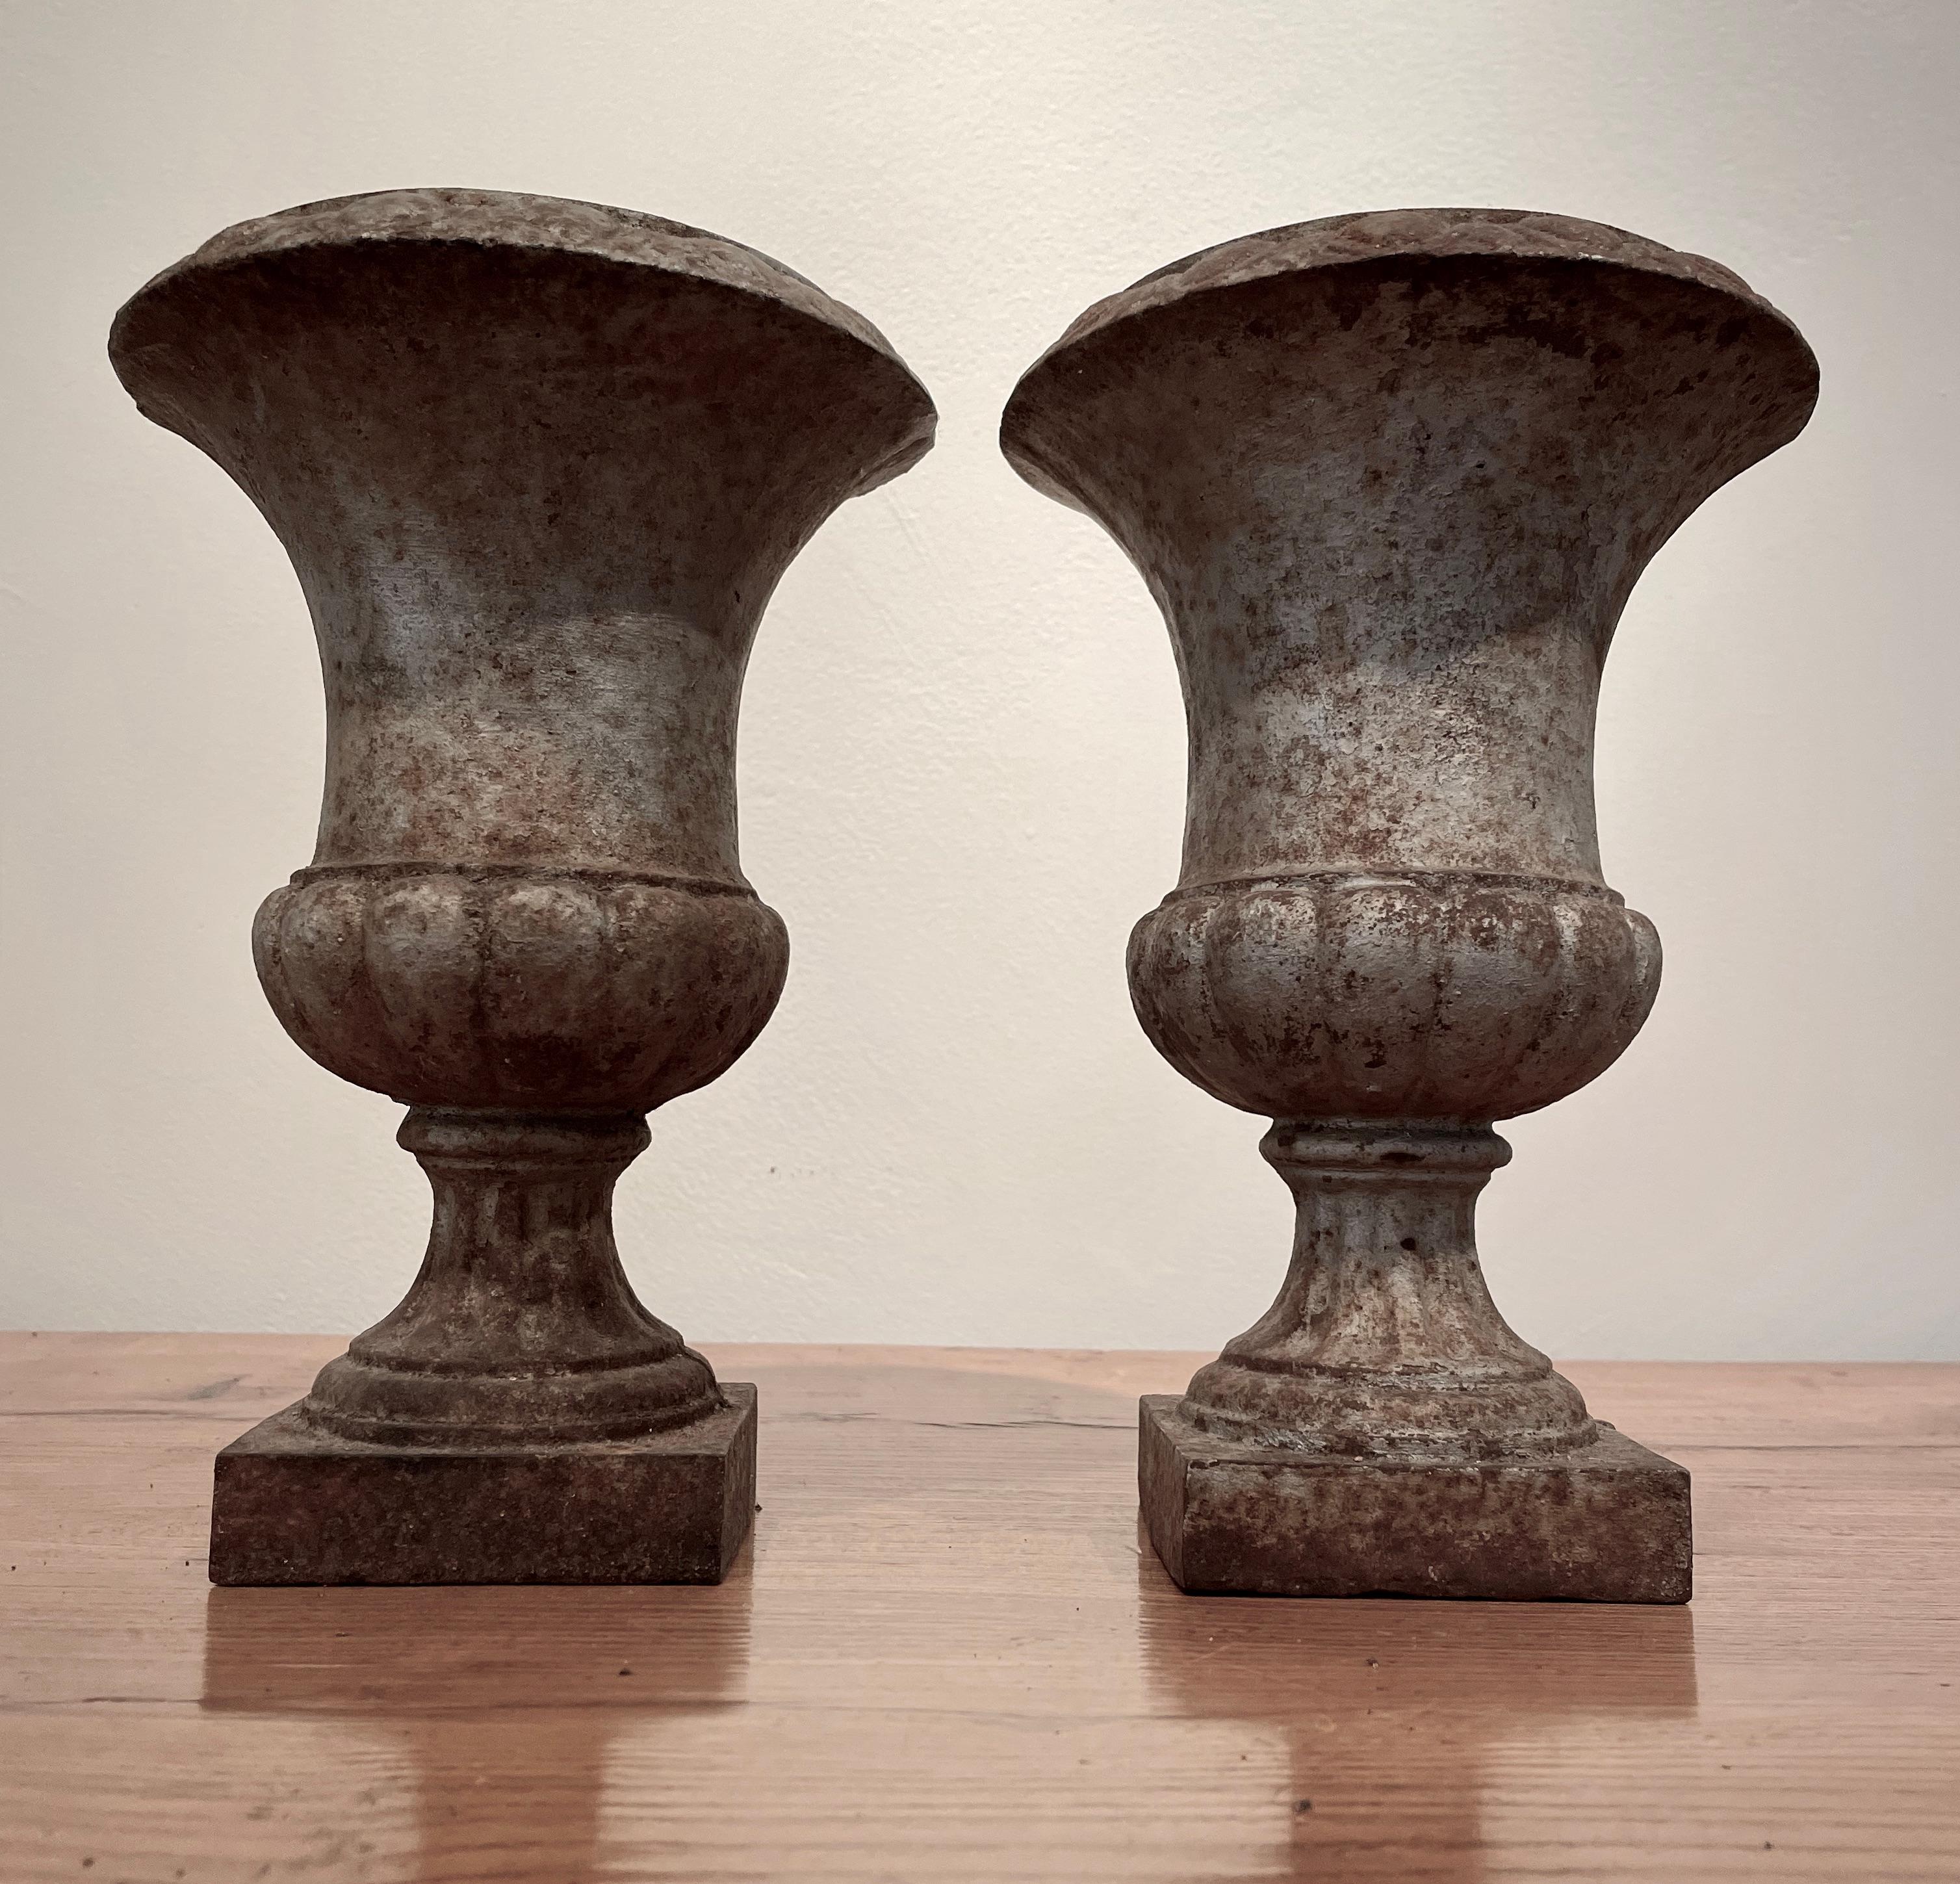 We love these French cast iron urns for their diminutive size, egg and dart rim, elegant form, and well-weathered original silver painted surface. In perfect condition, they would be beautiful holding dried or silk flowers on your bedside tables or